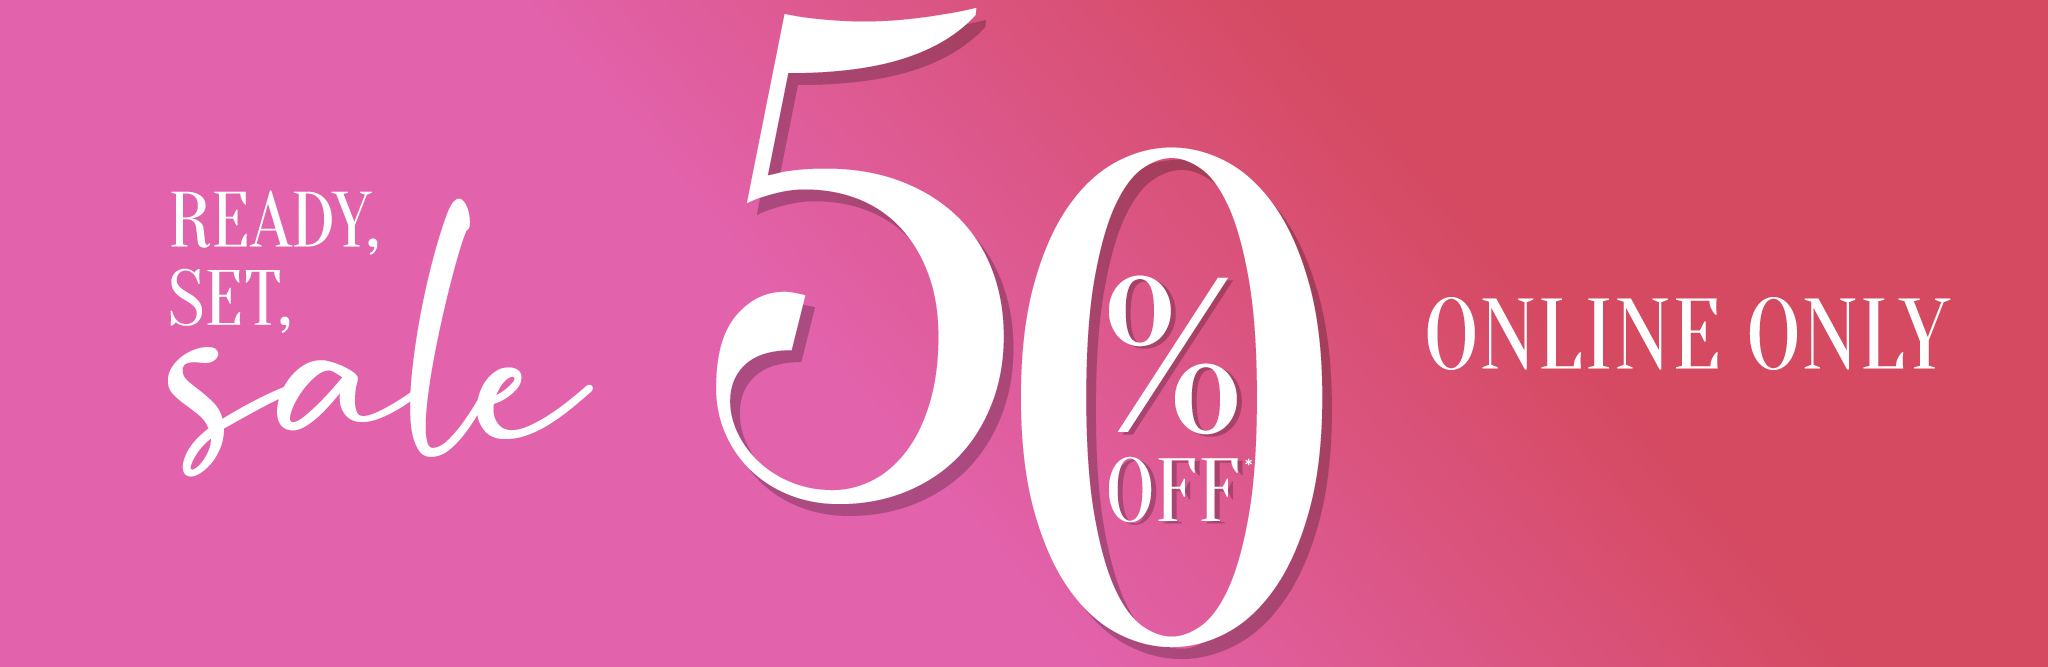 Novo Shoes 50% OFF on selected styles including heels, sandals, wedges & more